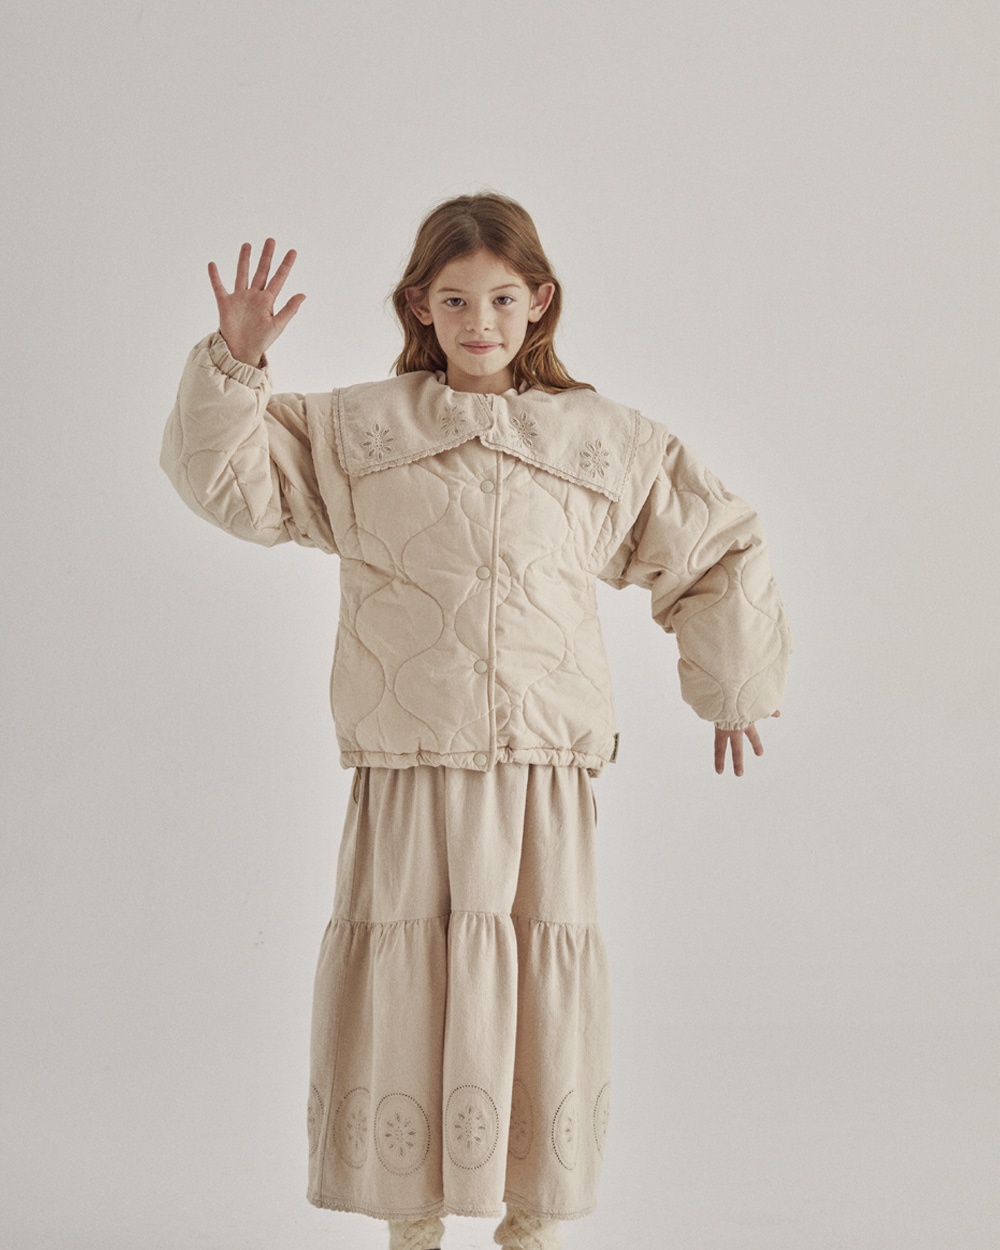 [THE NEW SOCIETY] Colette Jacket Sand /Sand [6Y,8Y,10Y,12Y]